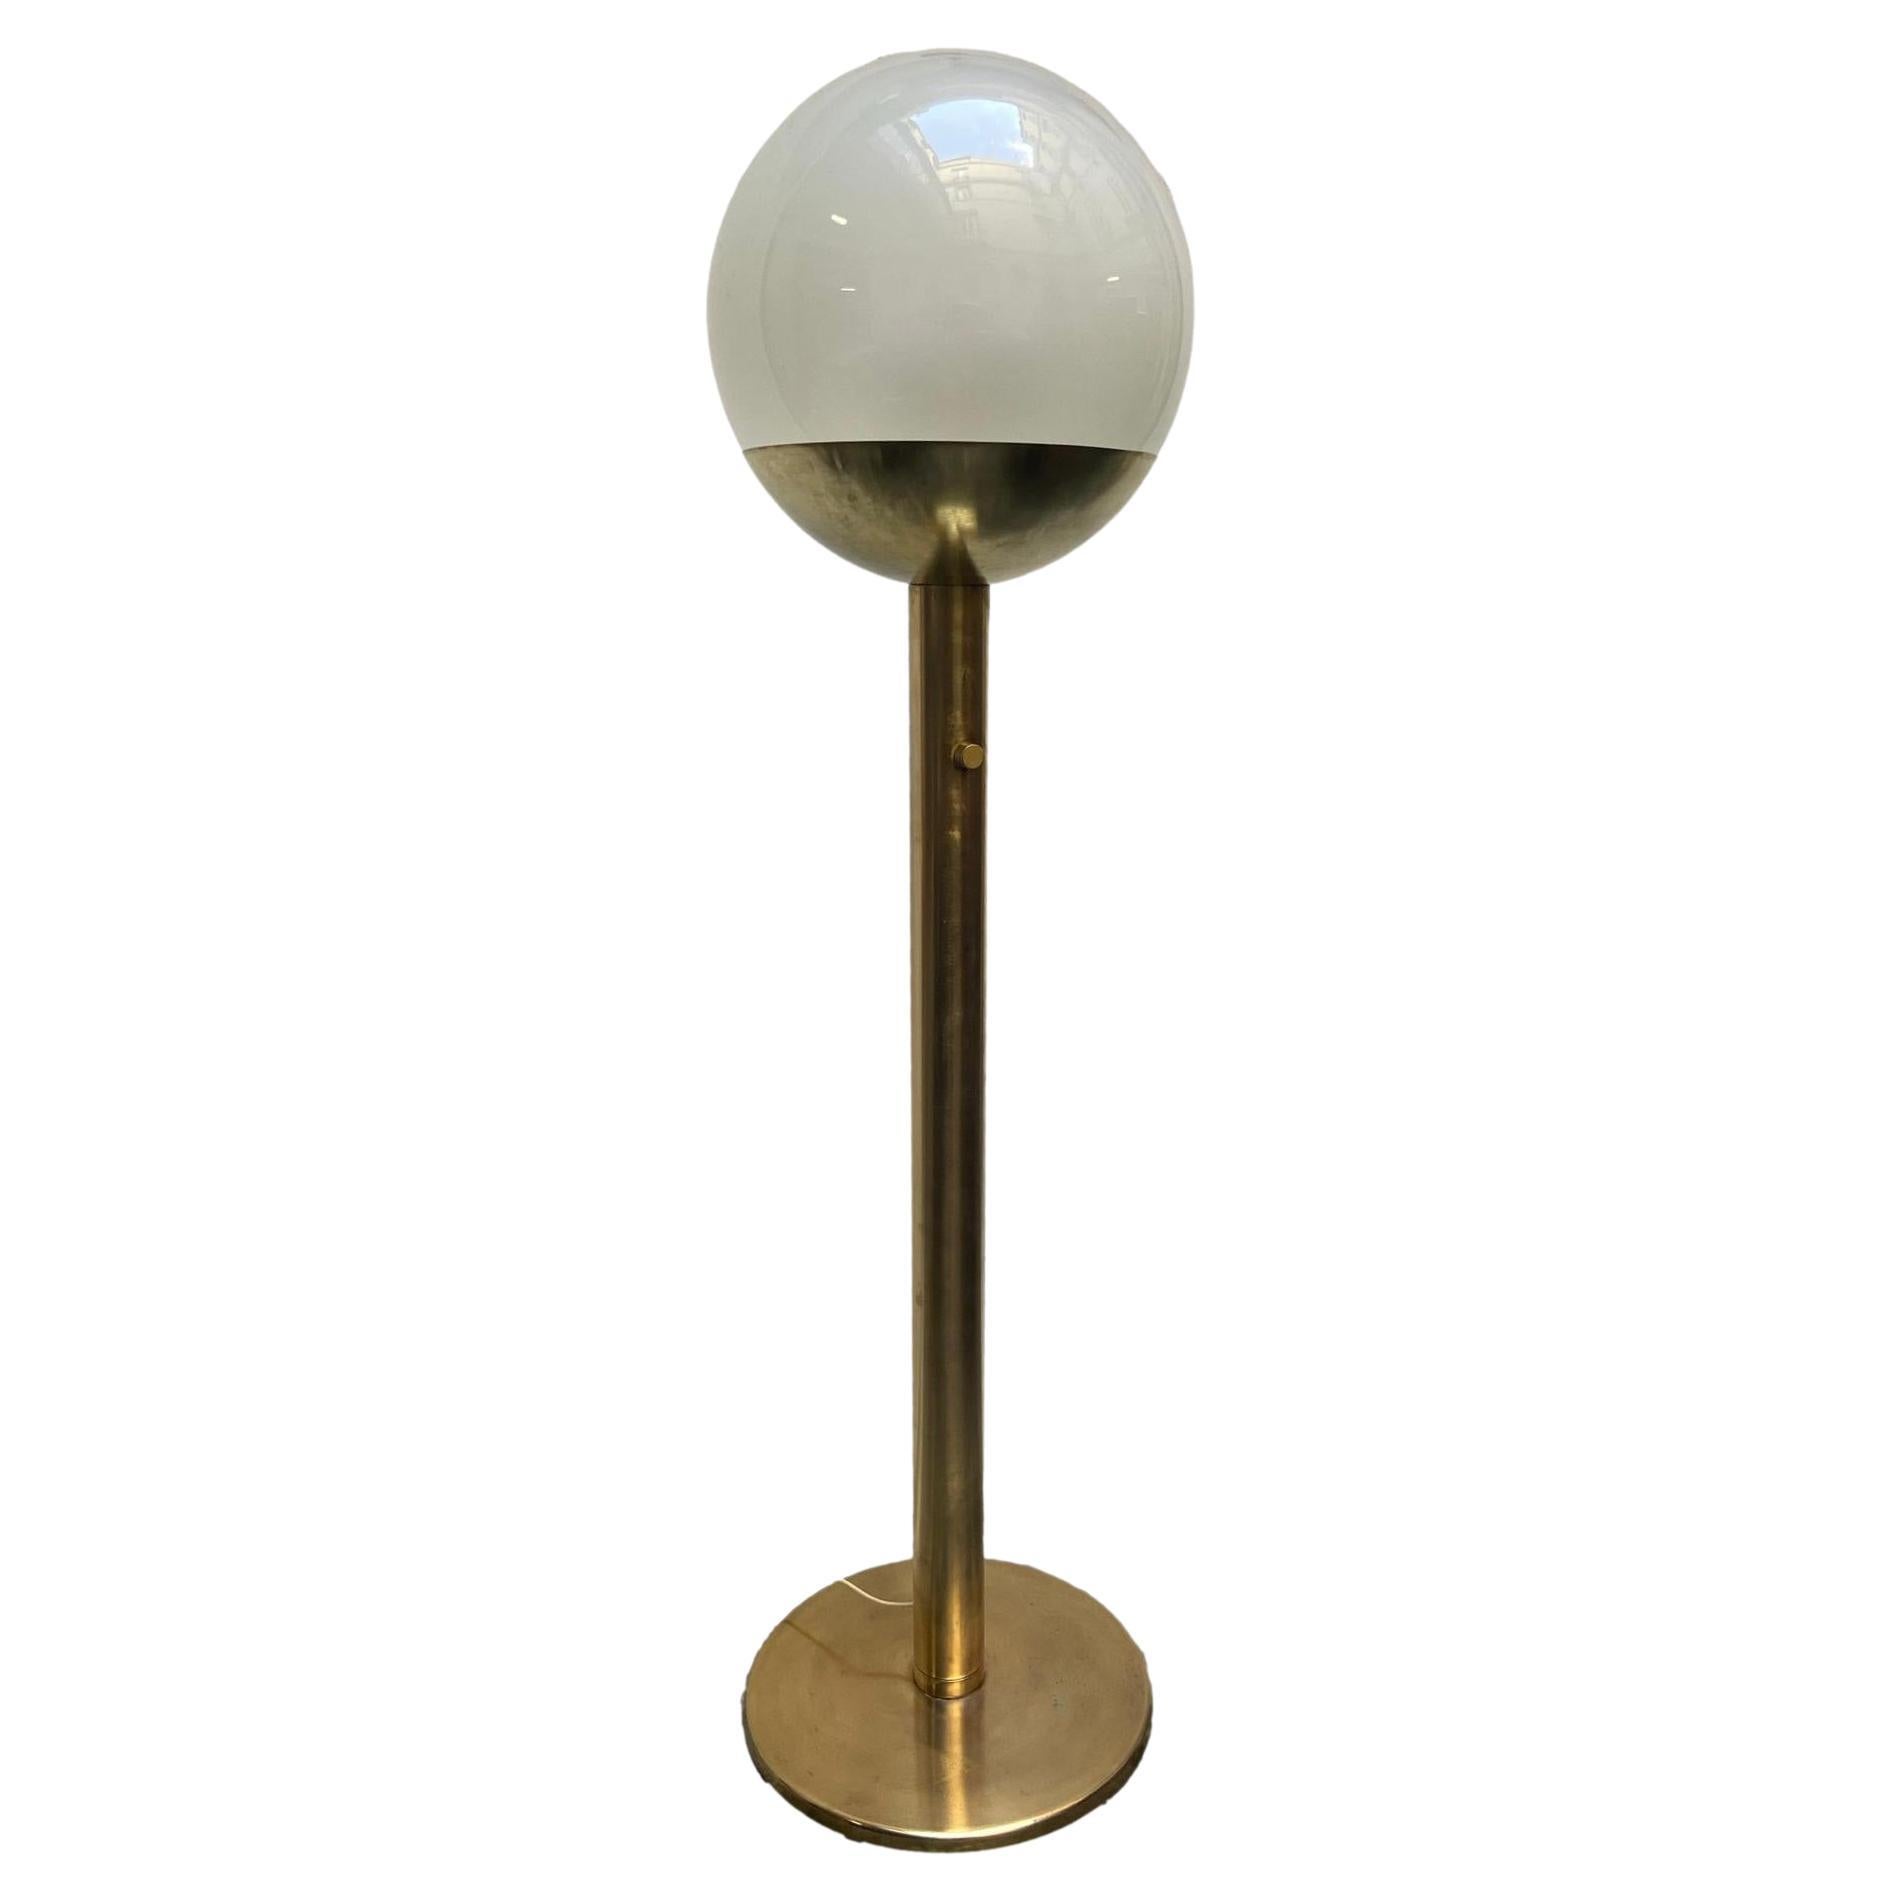 Pia Guidetti Crippa for Luci P428 Brass and Glass Floor Lamp, Italy, 1970s